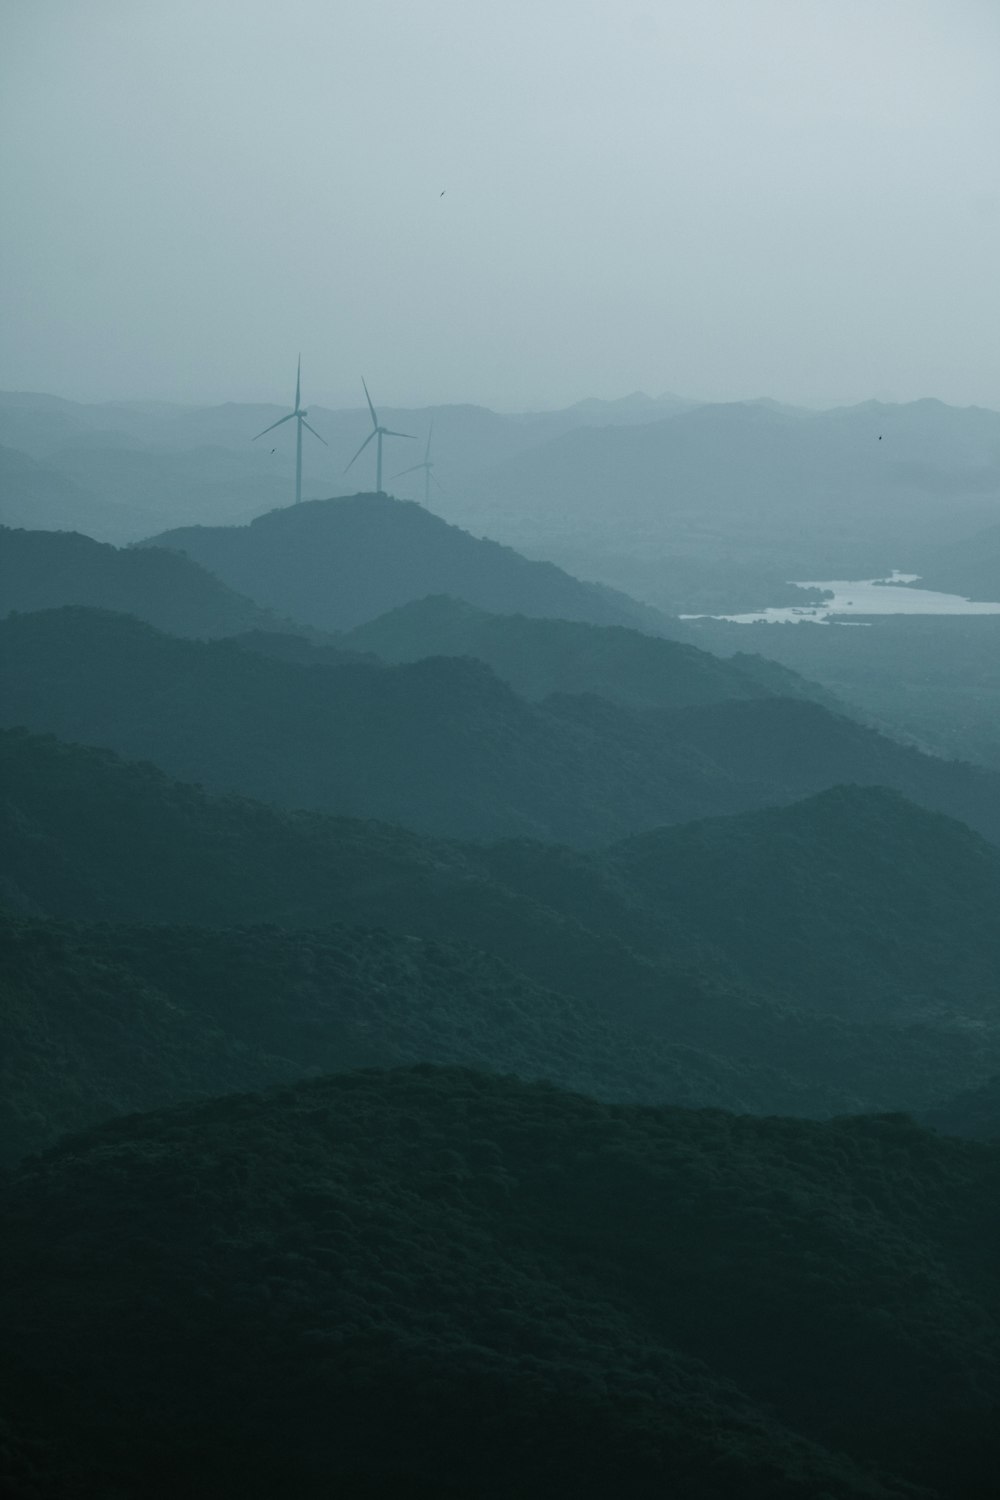 a wind farm on a foggy day in the mountains